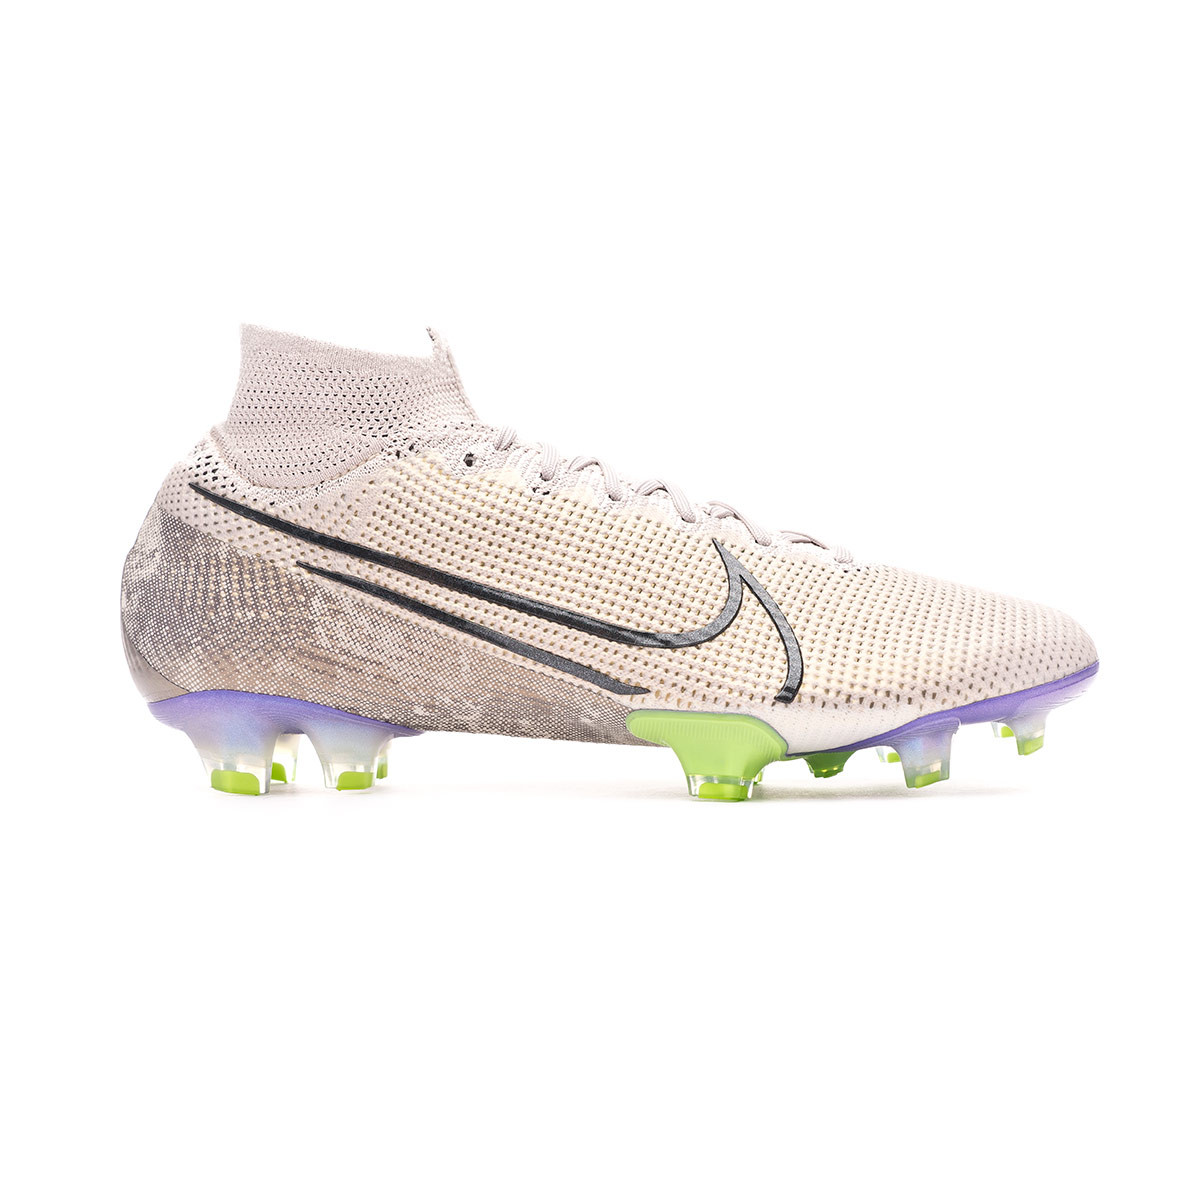 Superfly 6 Elite FG Game Over Firm Ground Football Boot.